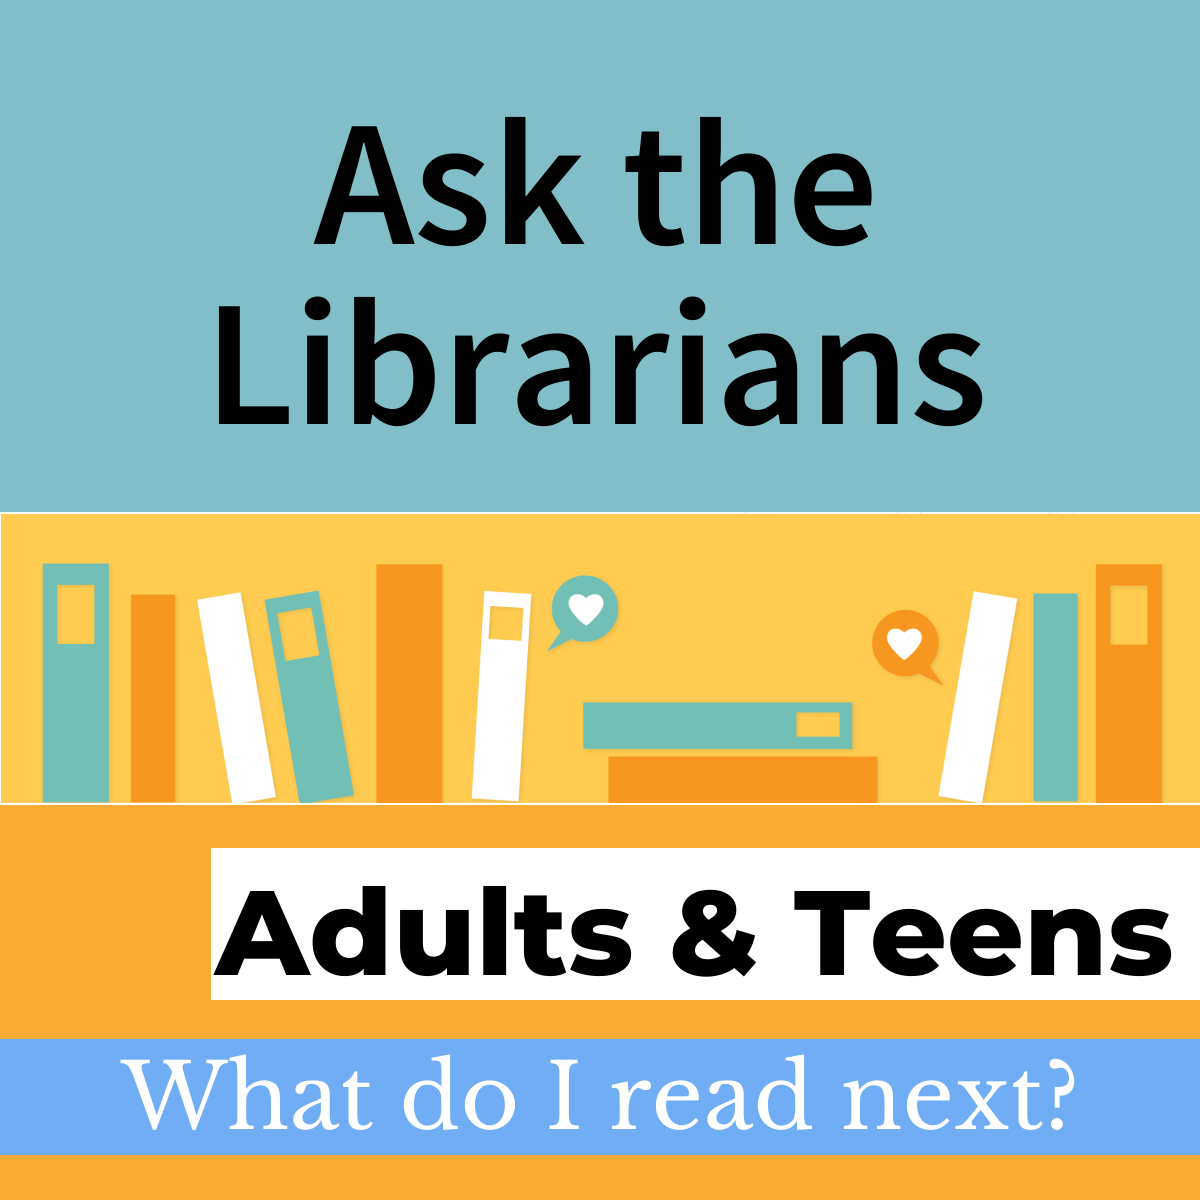 Ask the librarians form teens adults